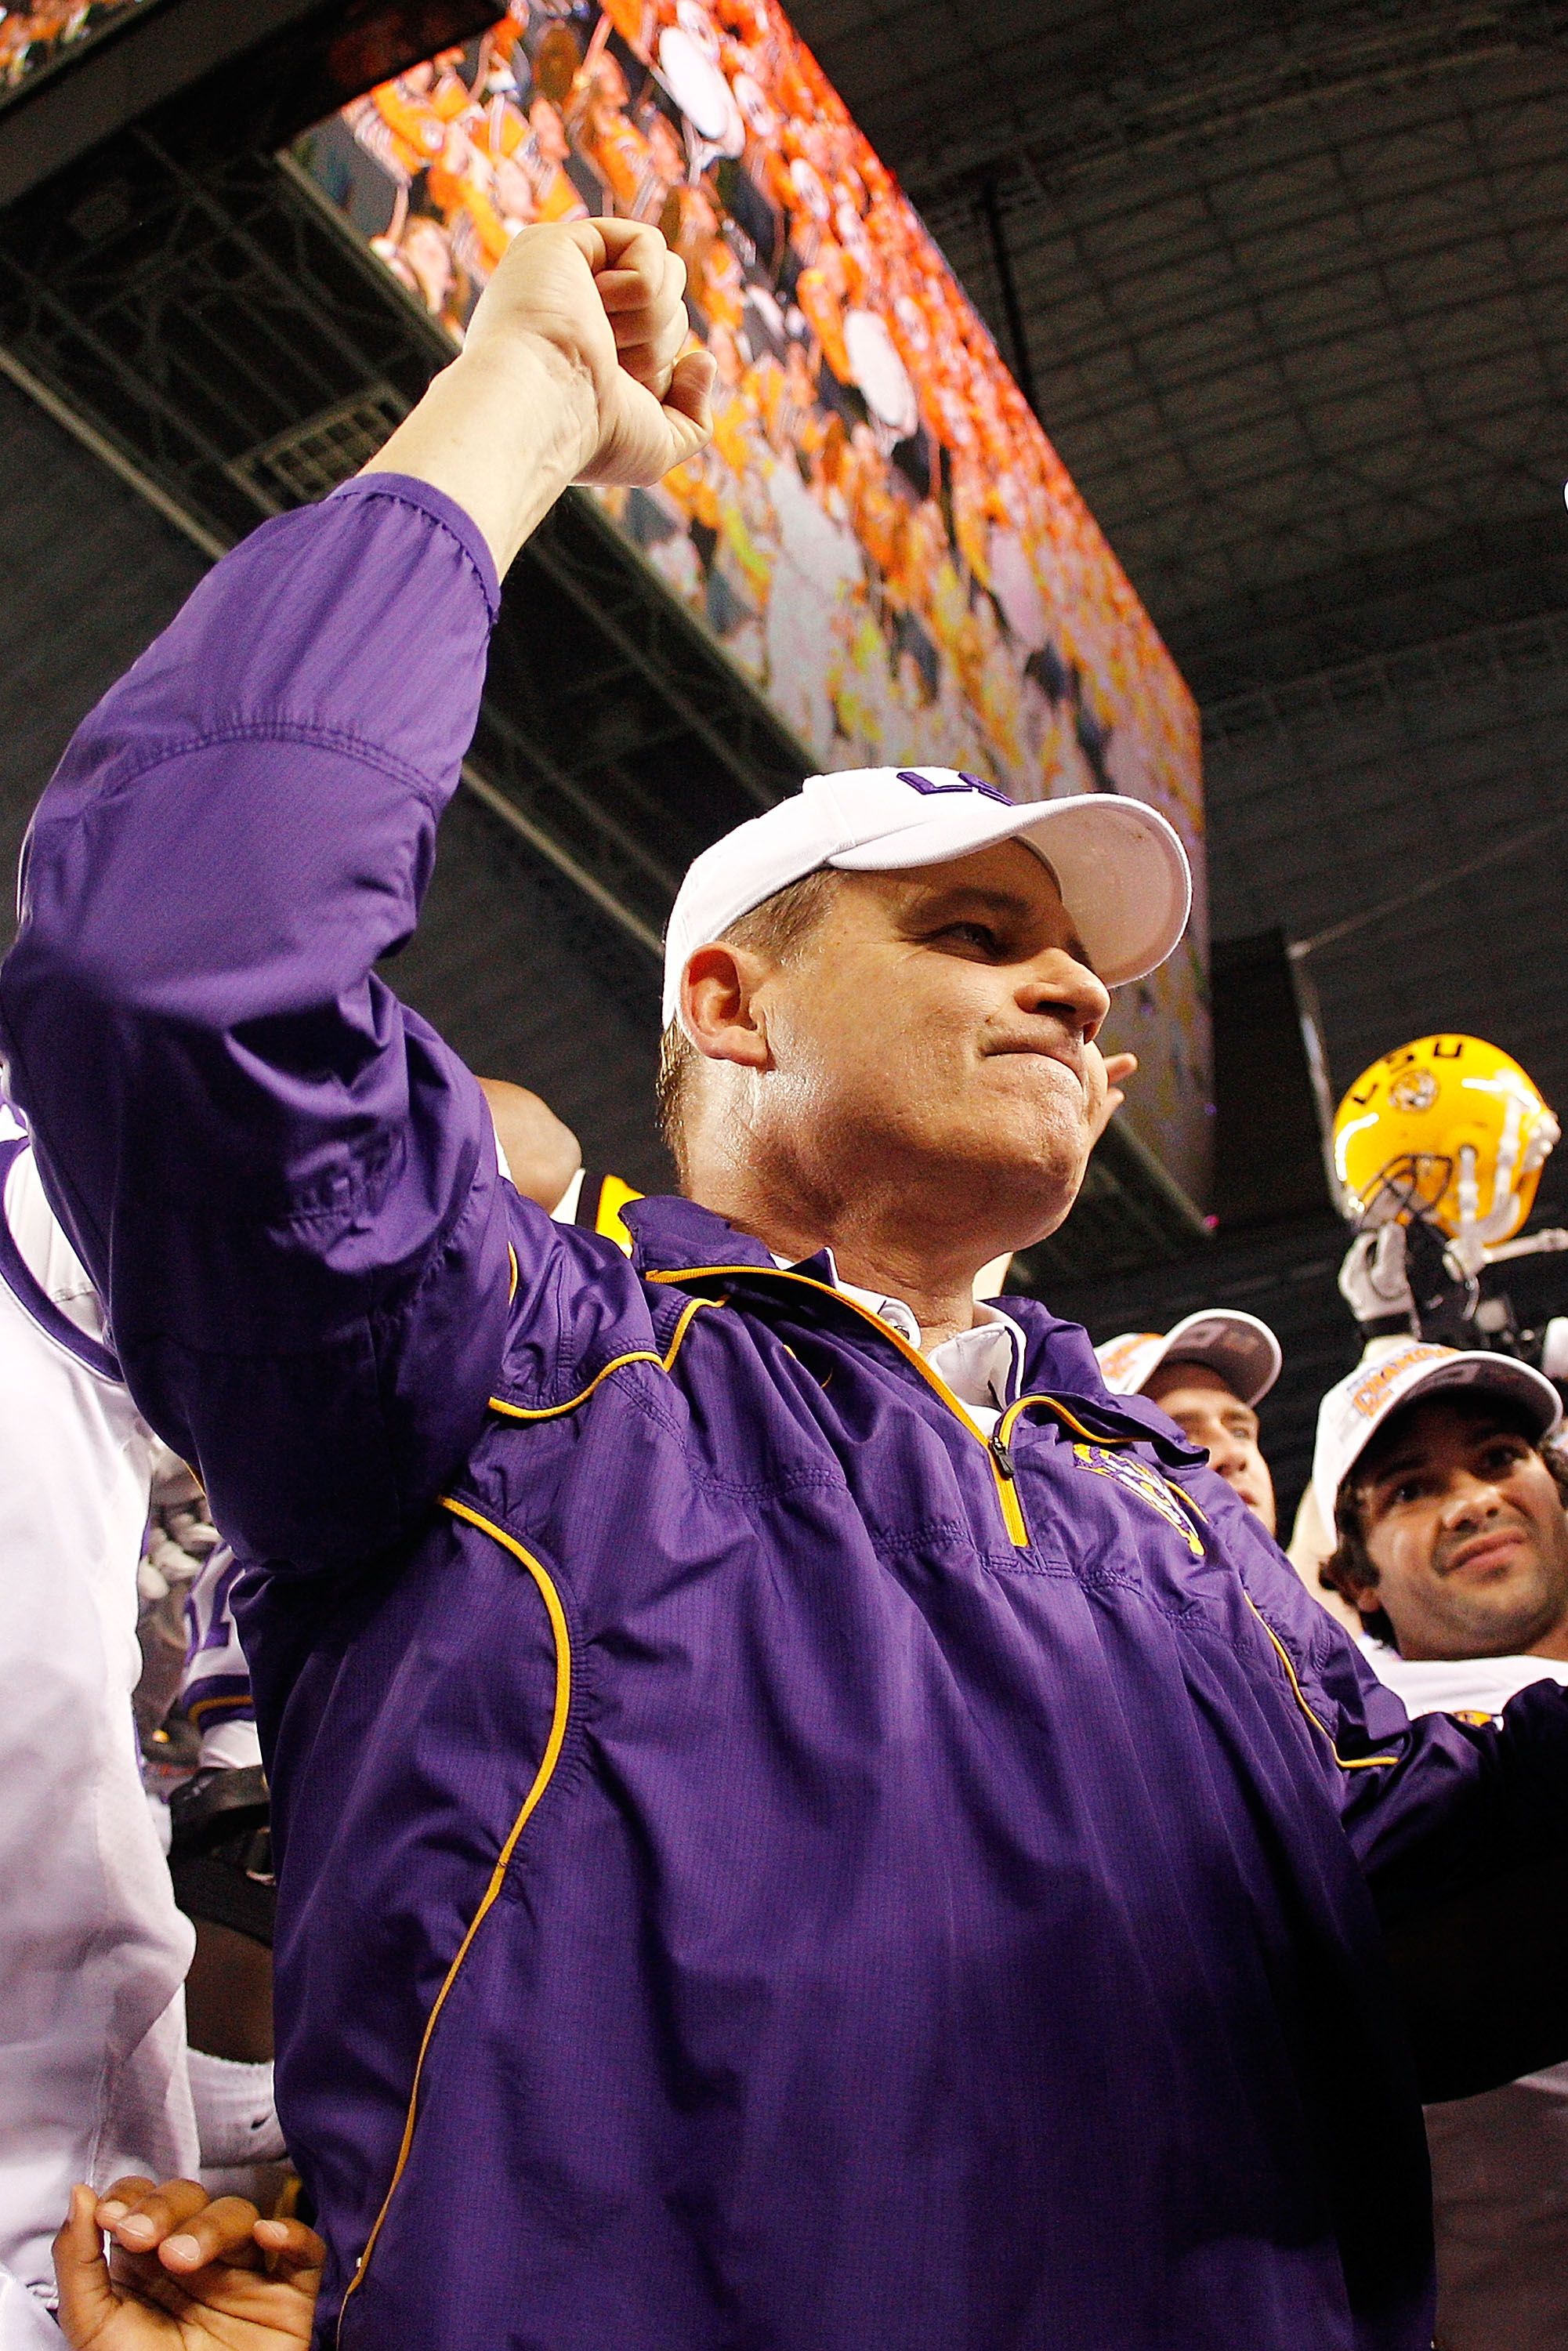 ARLINGTON, TX - JANUARY 07:  Head coach Les Miles of the Louisiana State University Tigers celebrates after defeating the Texas A&M Aggies 41-24 during the AT&T Cotton Bowl at Cowboys Stadium on January 7, 2011 in Arlington, Texas.  (Photo by Chris Grayth